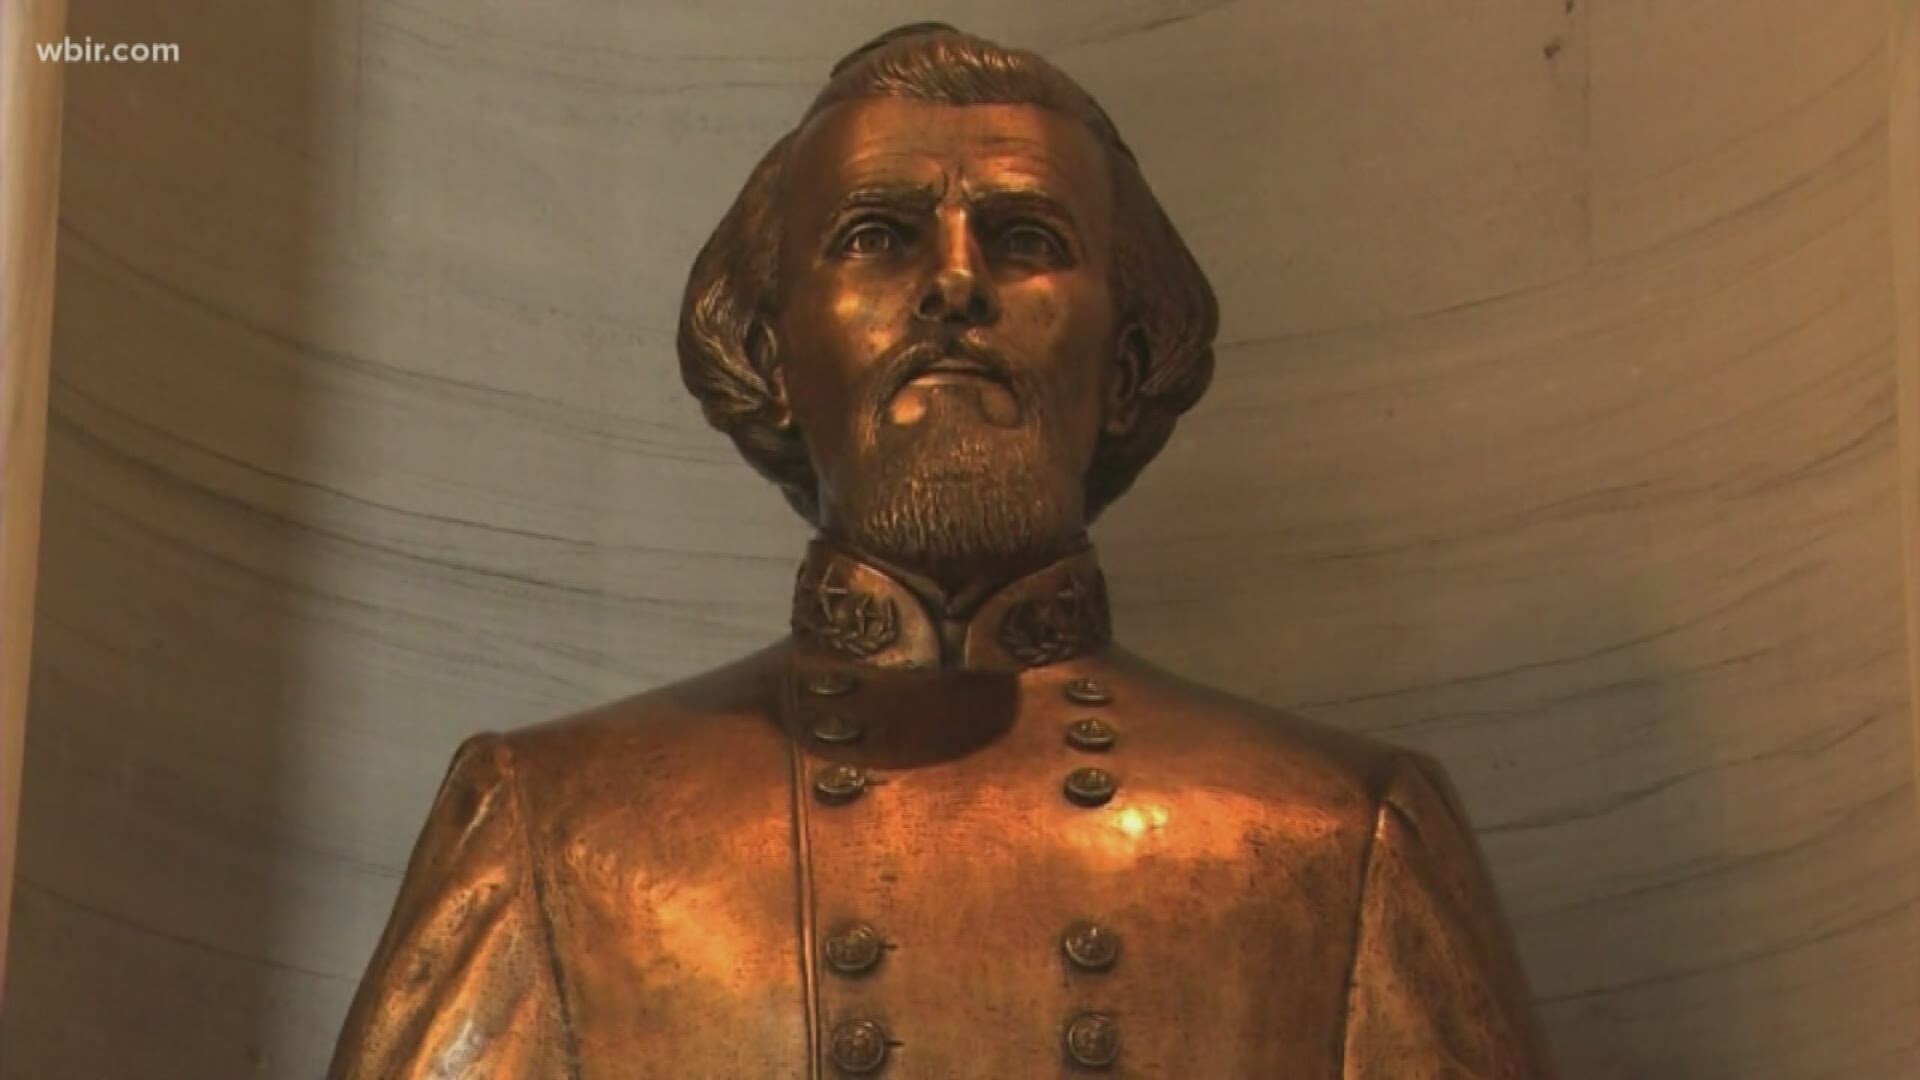 The resolution calls for removing the Forrest bust and replacing it with one of "literally thousands of Tennesseans more deserving of being honored..."